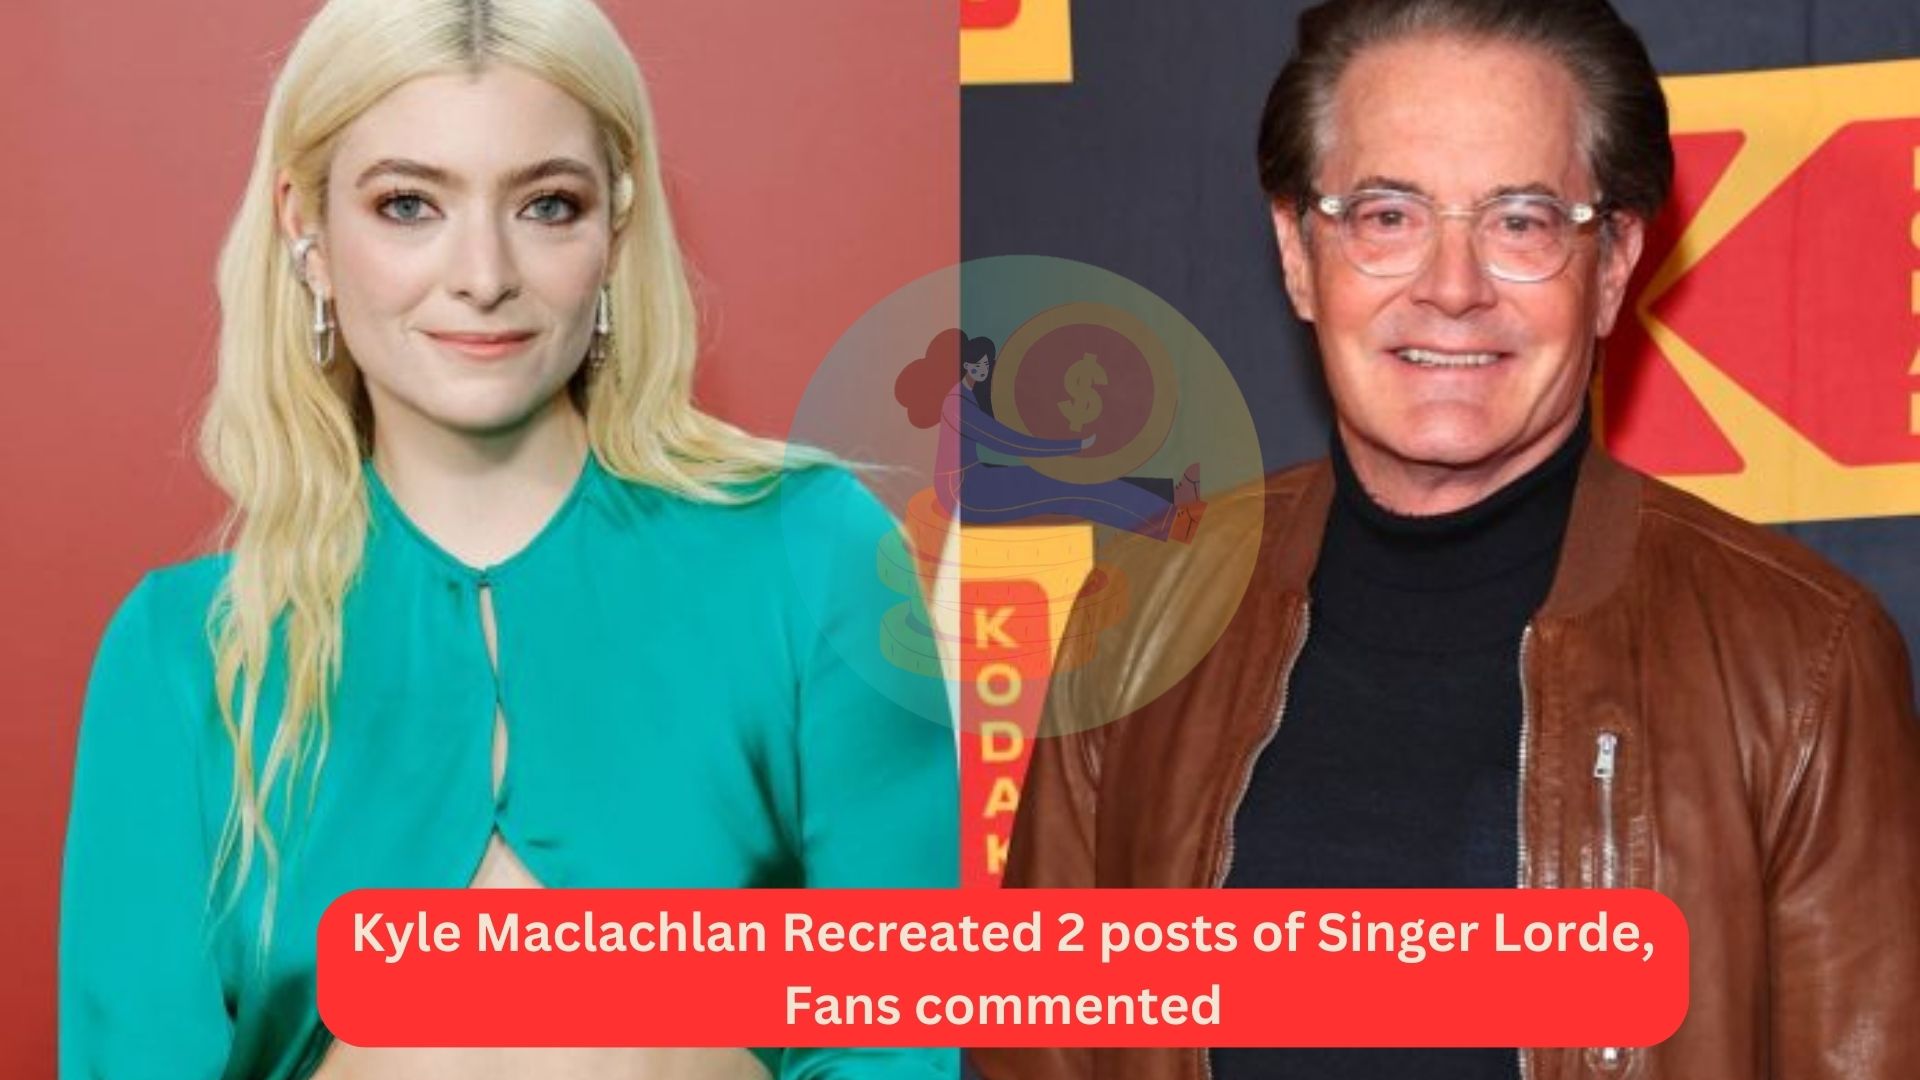 Kyle Maclachlan Recreated 2 posts of Singer Lorde, Fans commented